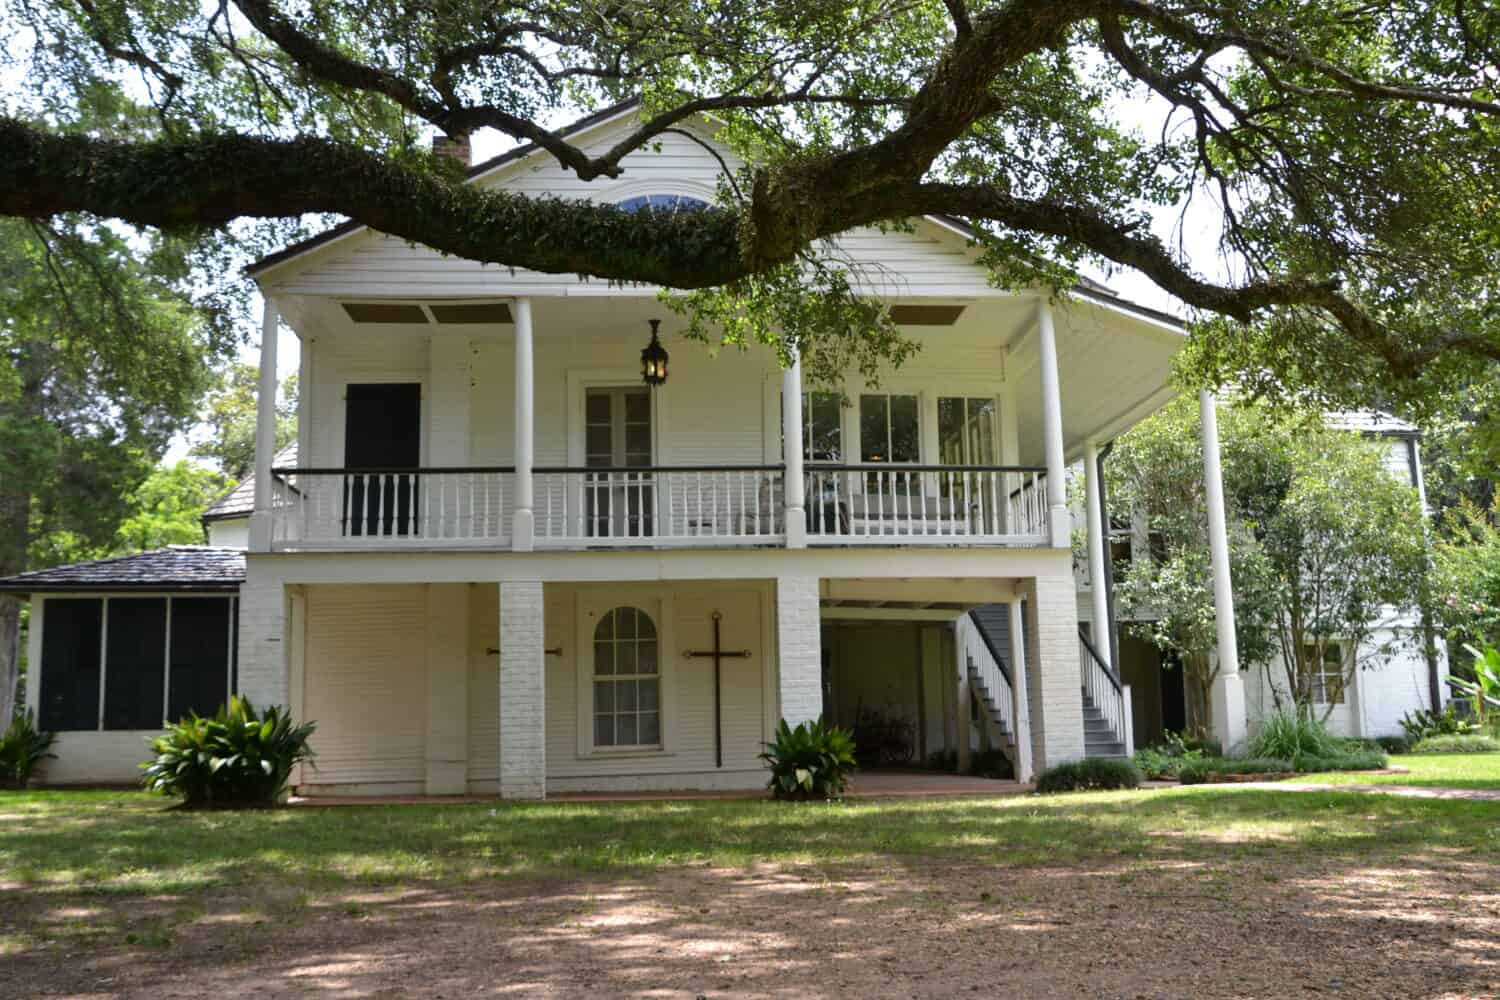 Oakland Plantation, part of the Cane River Creole National Historical Park located in Natchitoches, Louisiana 